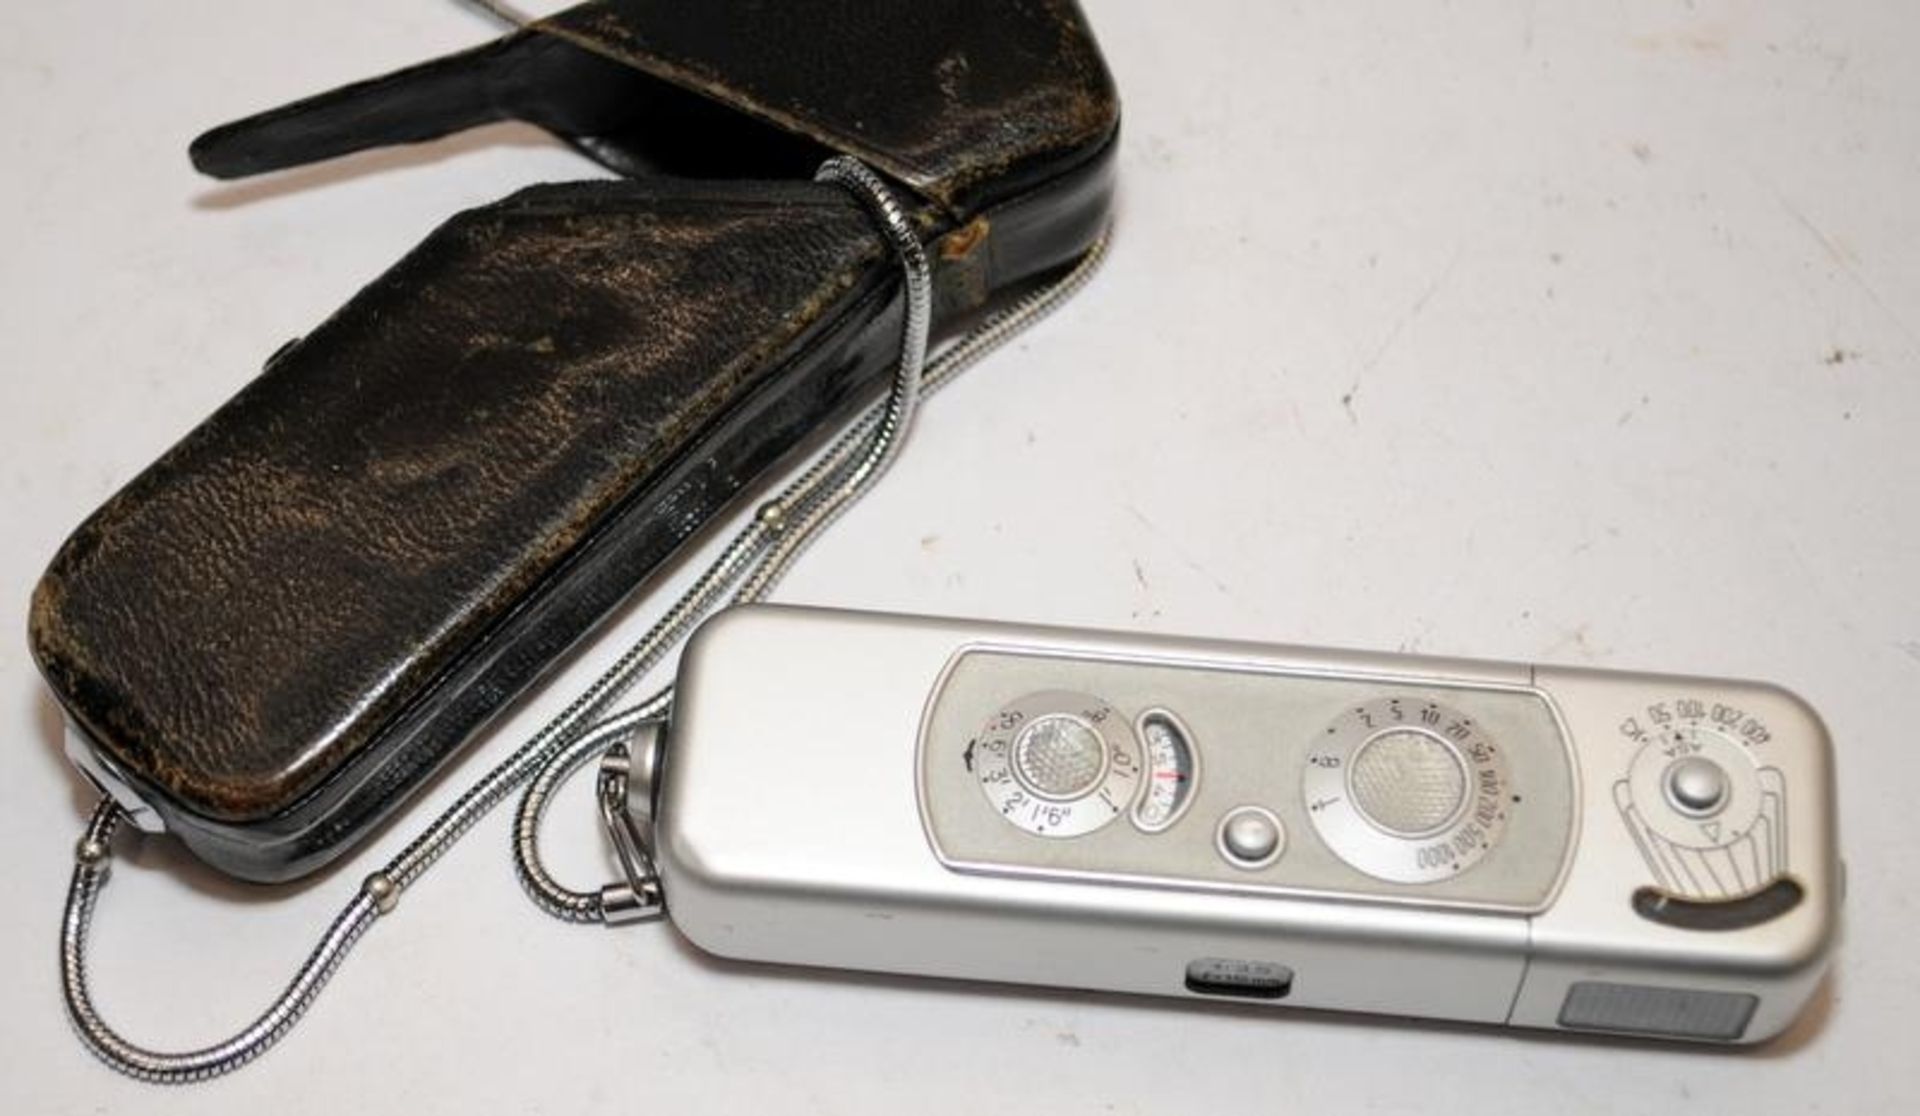 Vintage Minox B sub miniature spy camera. Rare in such good order complete in original box with - Image 2 of 7